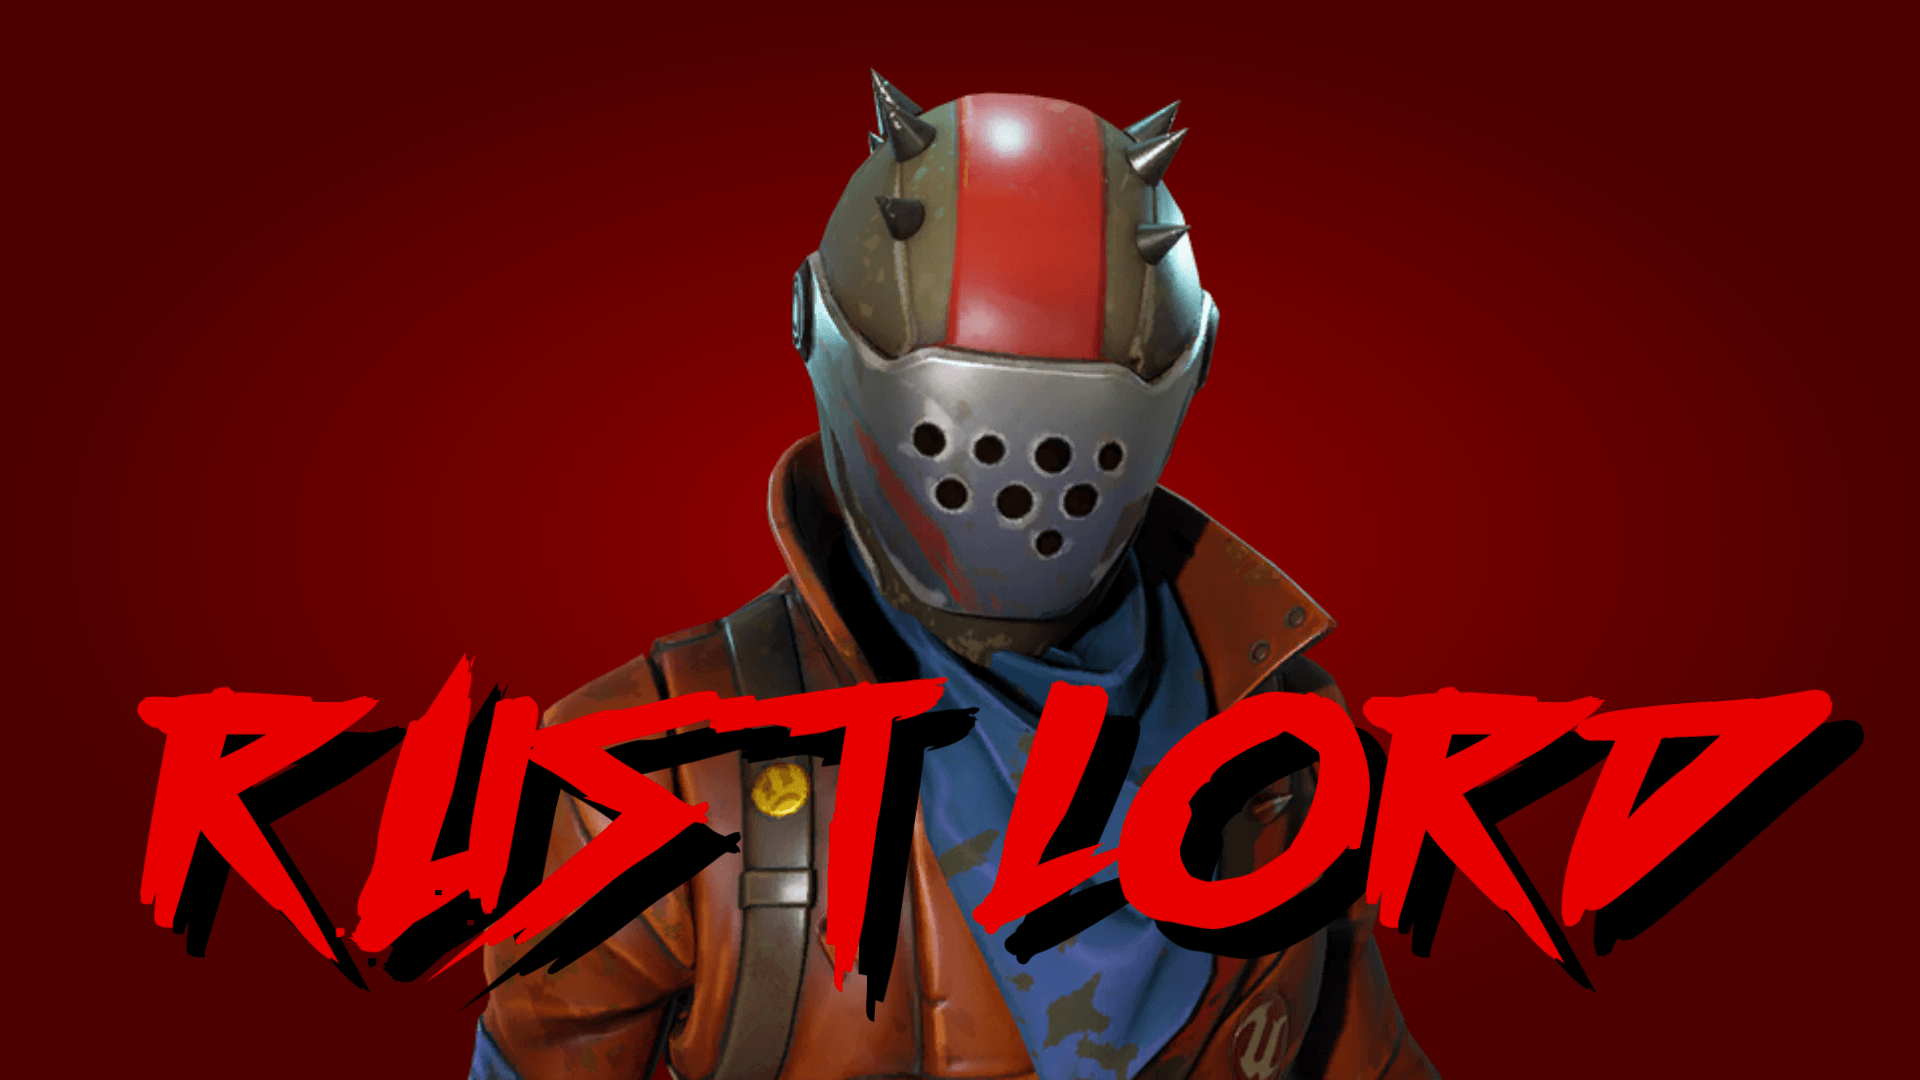 Wallpaper Of Rust Lord From Fortnite